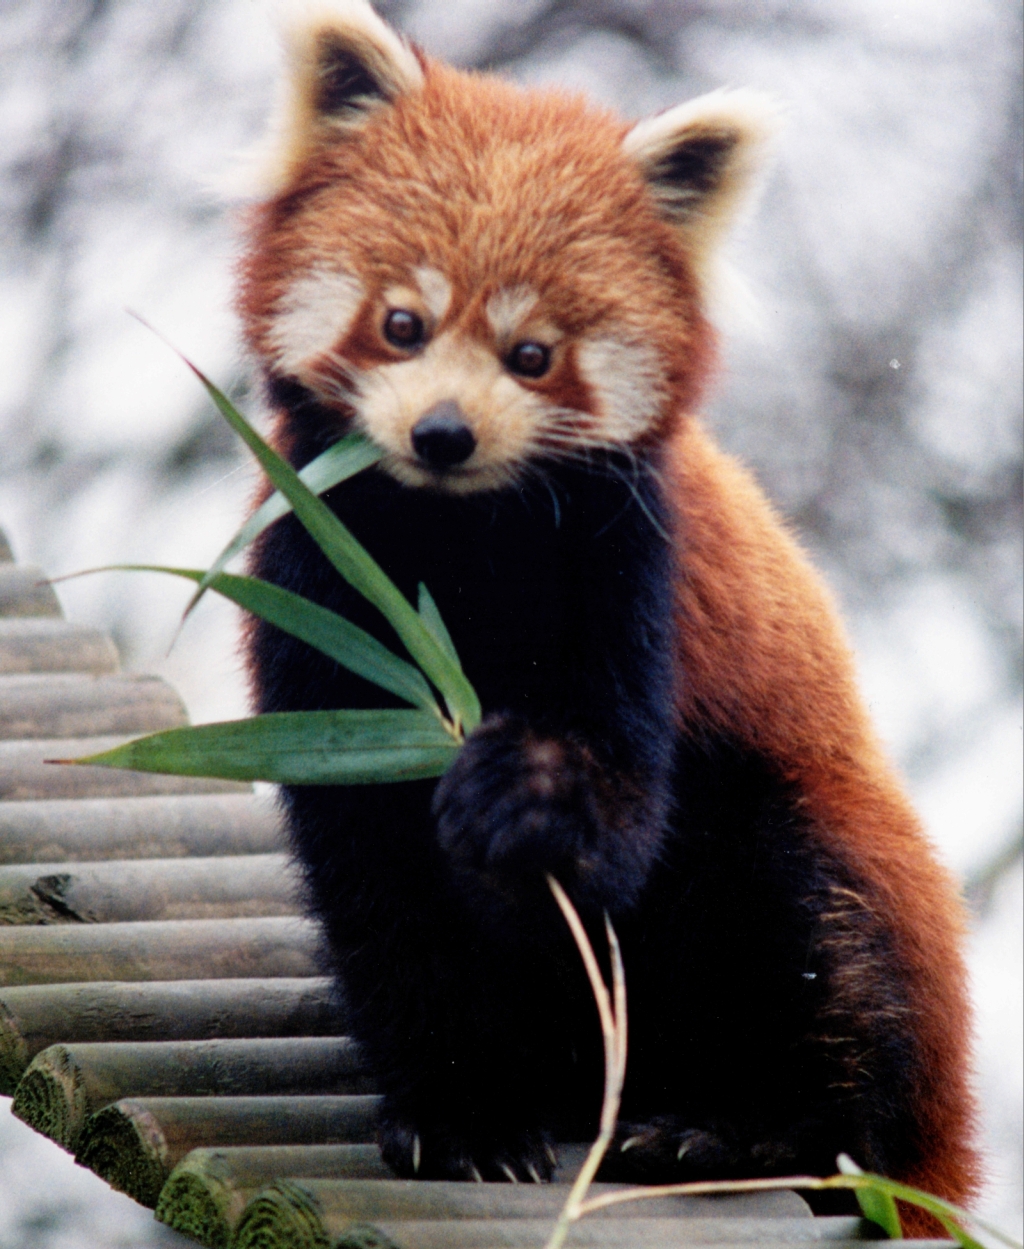 Red panda and giant panda genomes show convergent evolution | Ars Technica